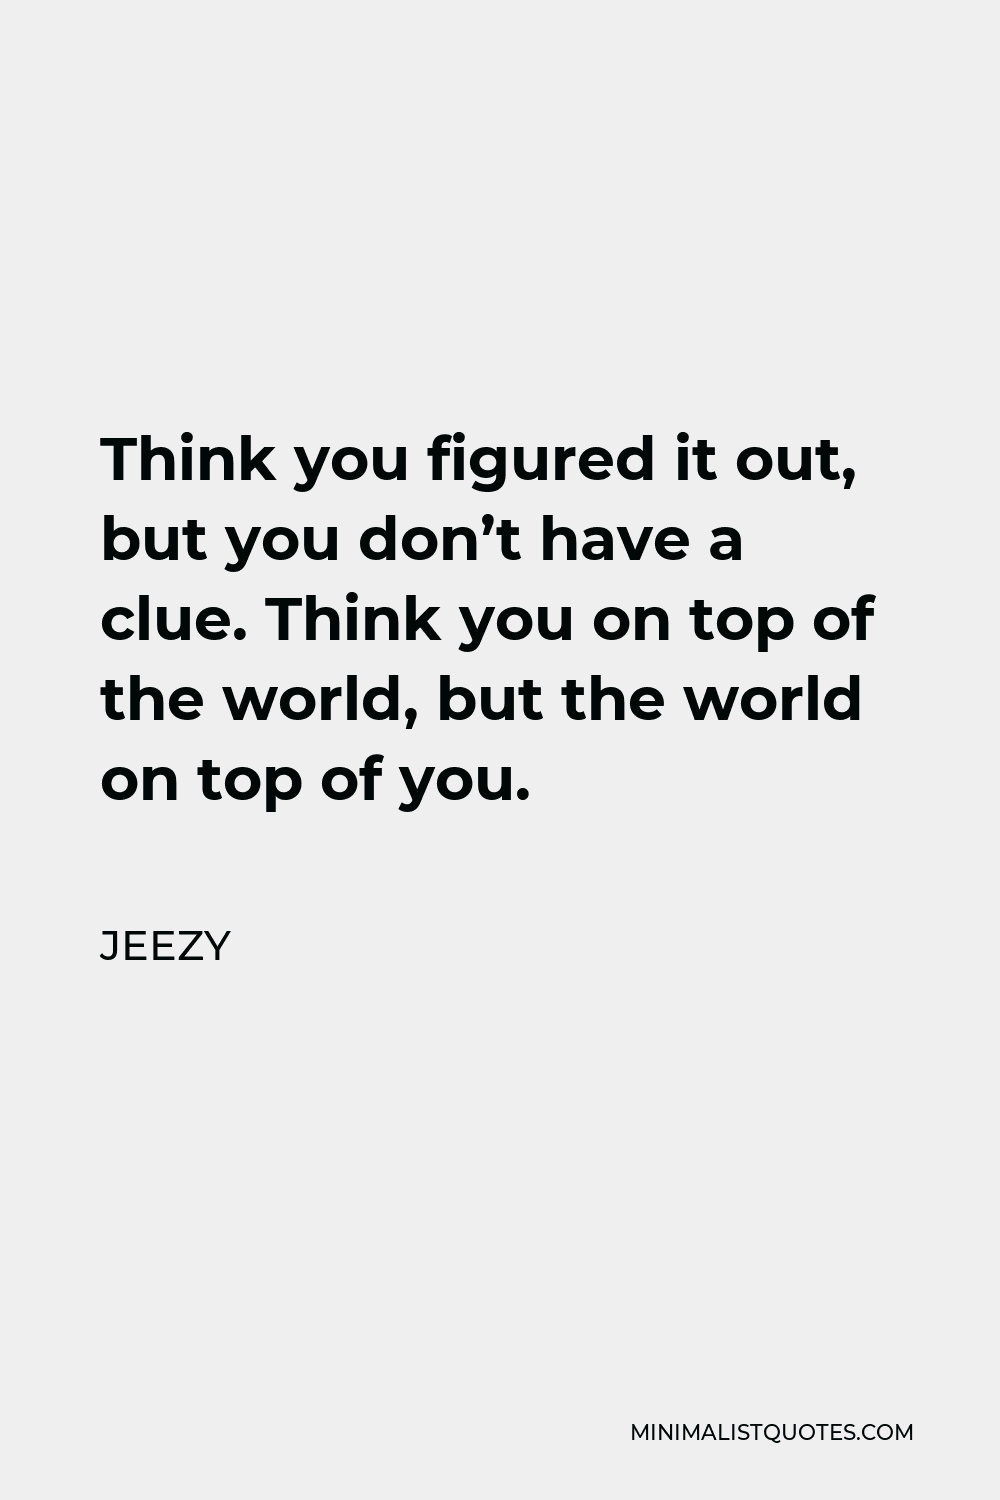 Jeezy Quote - Think you figured it out, but you don’t have a clue. Think you on top of the world, but the world on top of you.